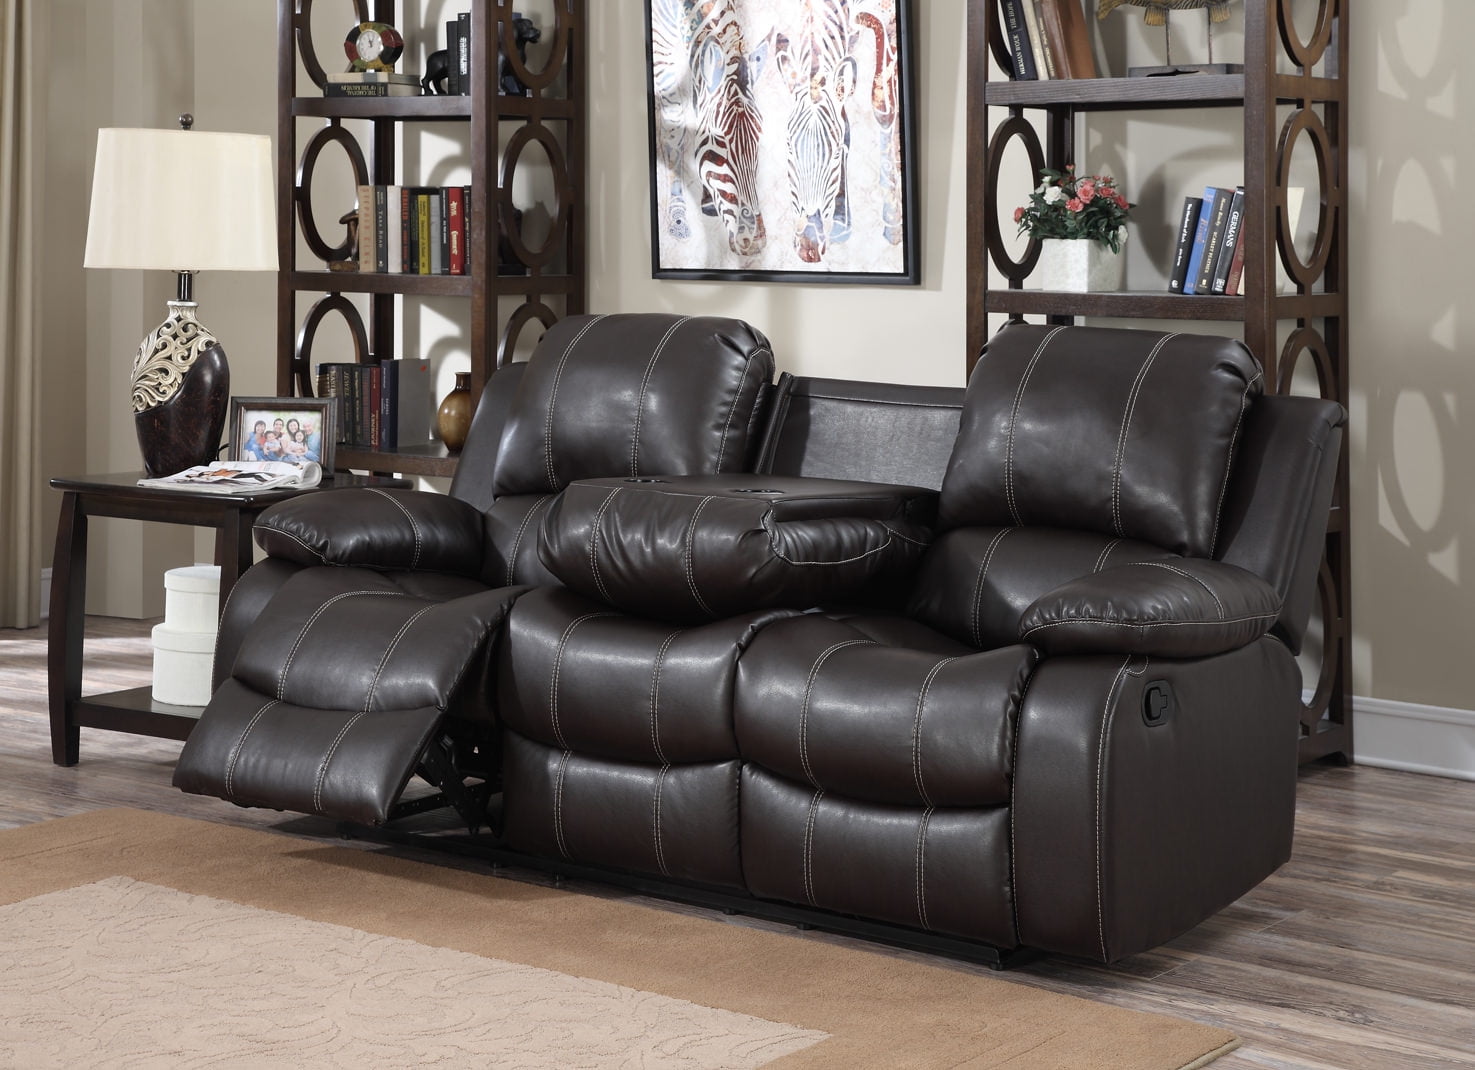 Dark Brown Pu Leather 3 Seat Double Recliner Sofa With Drop Down Table Com